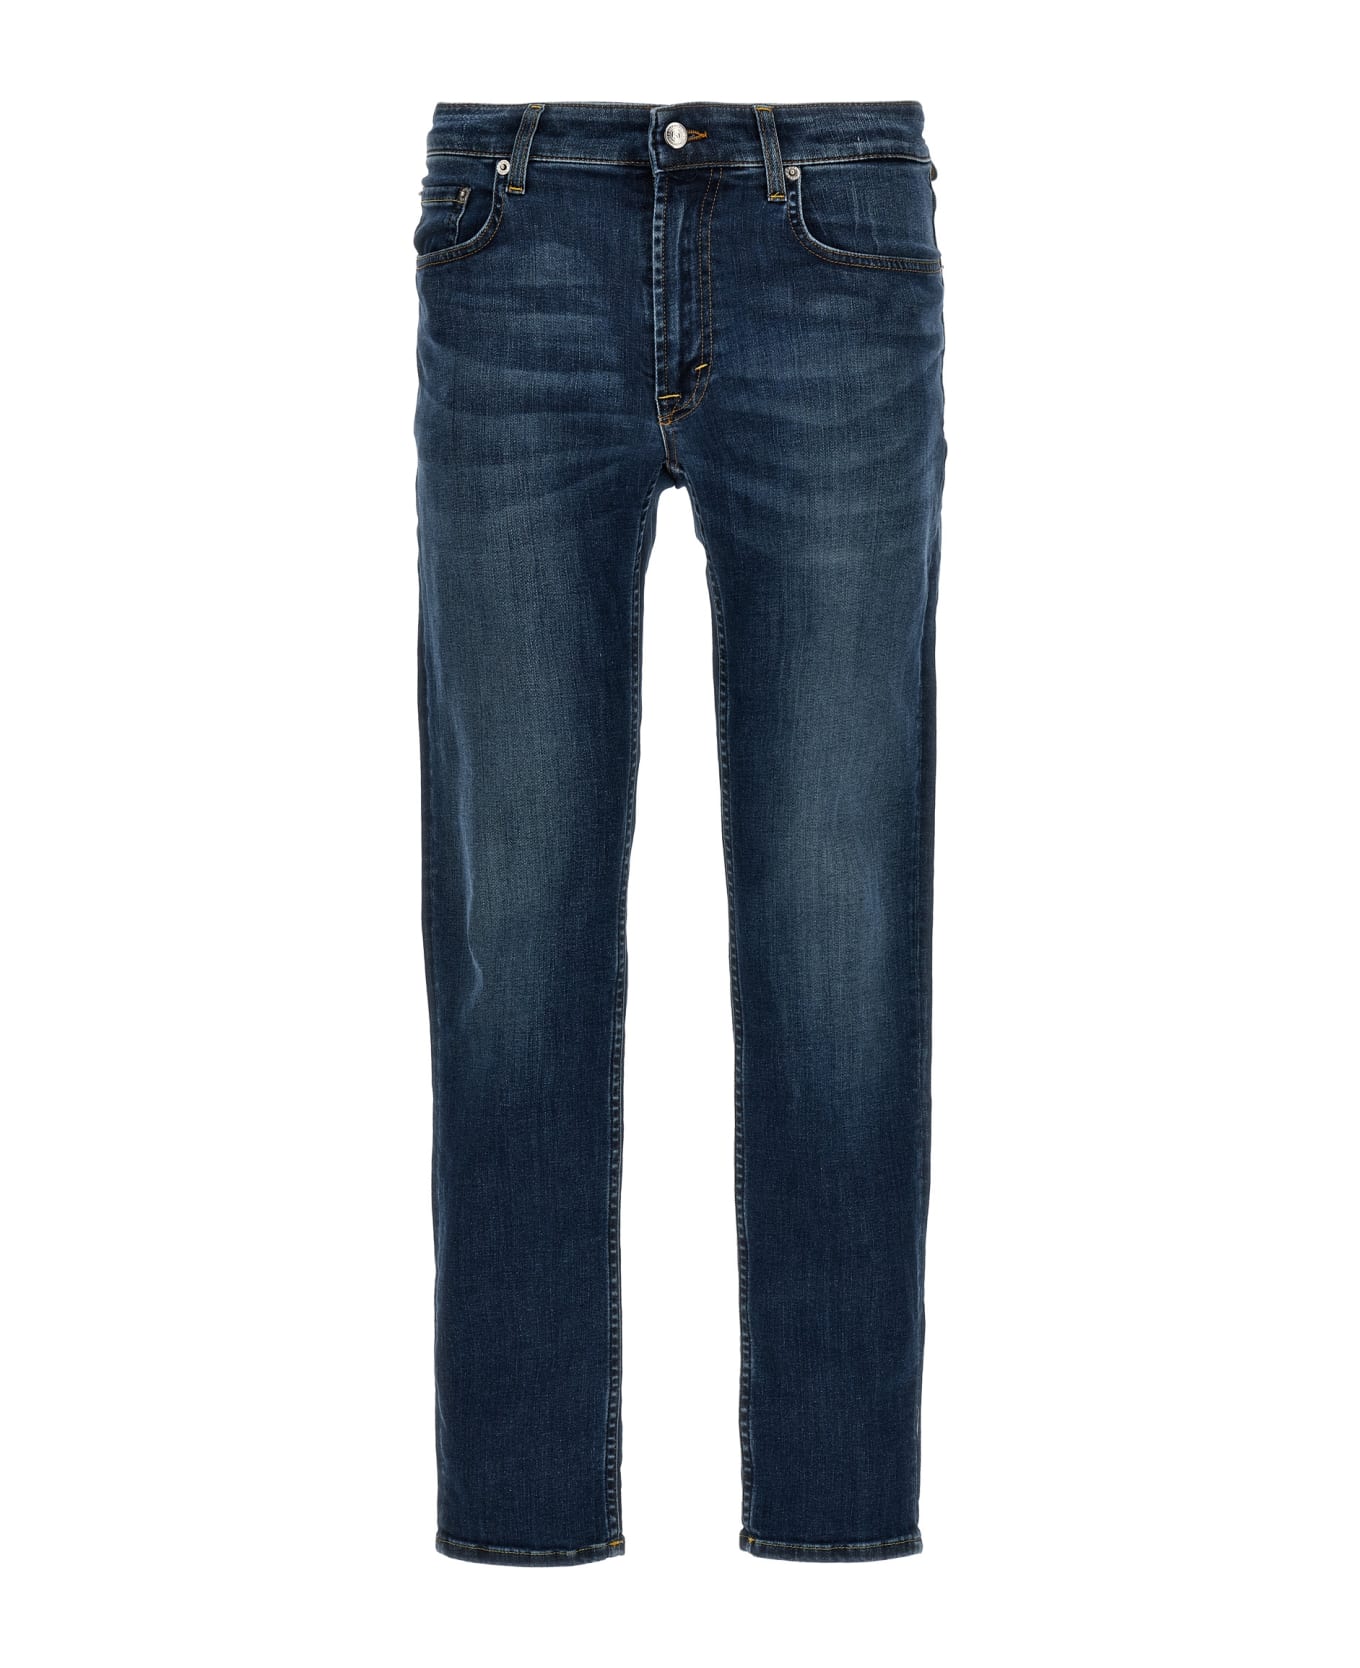 Department Five 'skeith' Jeans - Blue